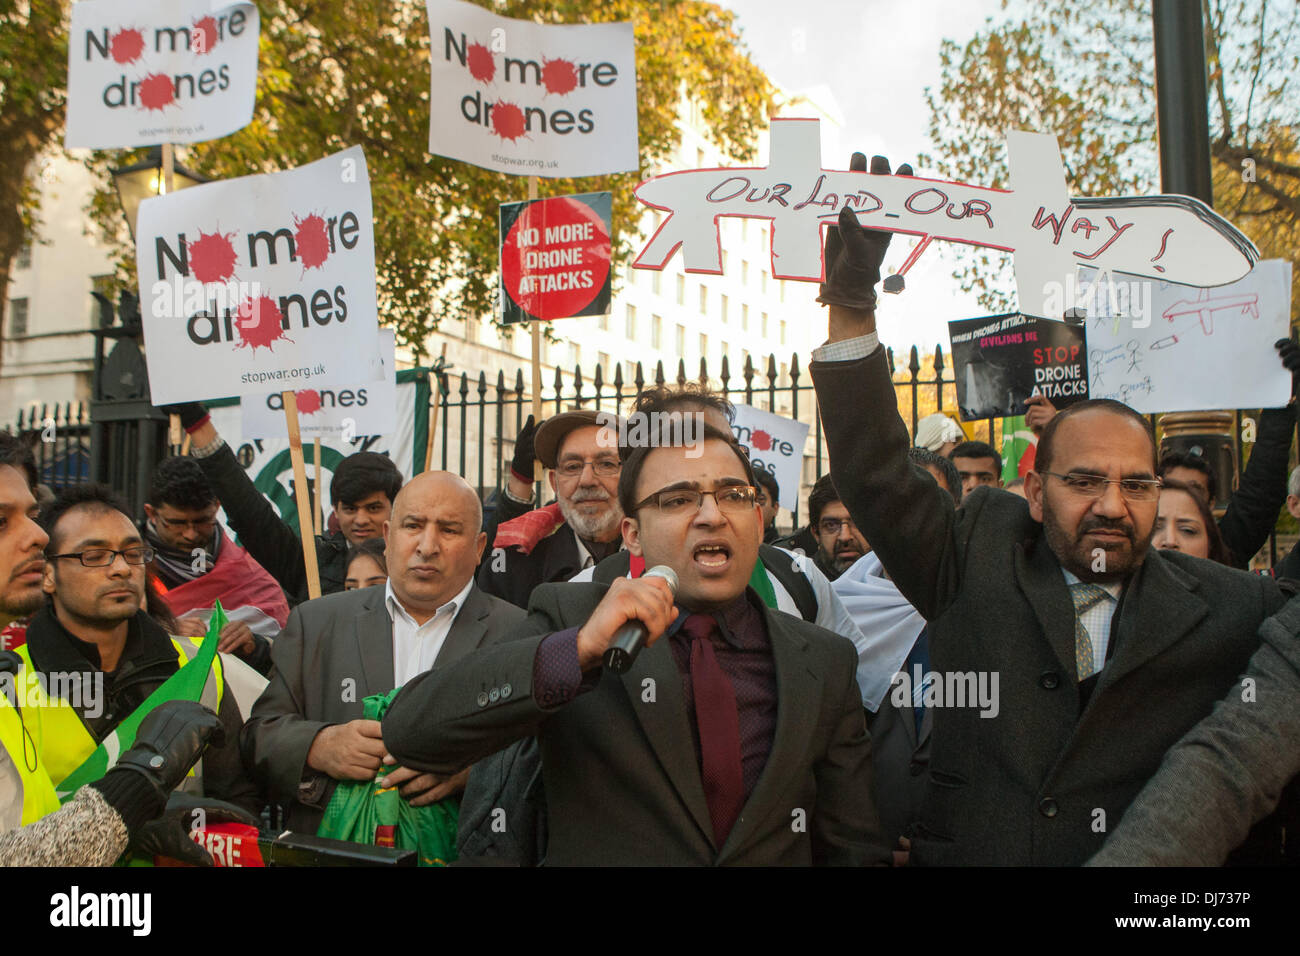 London, UK . 23rd Nov, 2013. Members and supporters of Pakistan Tehreek-e-Insaf (the Pakistani political party headed by Imran Khan) in the UK march from 10 Downing Street to the US Embassy in London to protest US drones strikes in Pakistan. London, UK 23 November 2013 Credit:  martyn wheatley/Alamy Live News Stock Photo